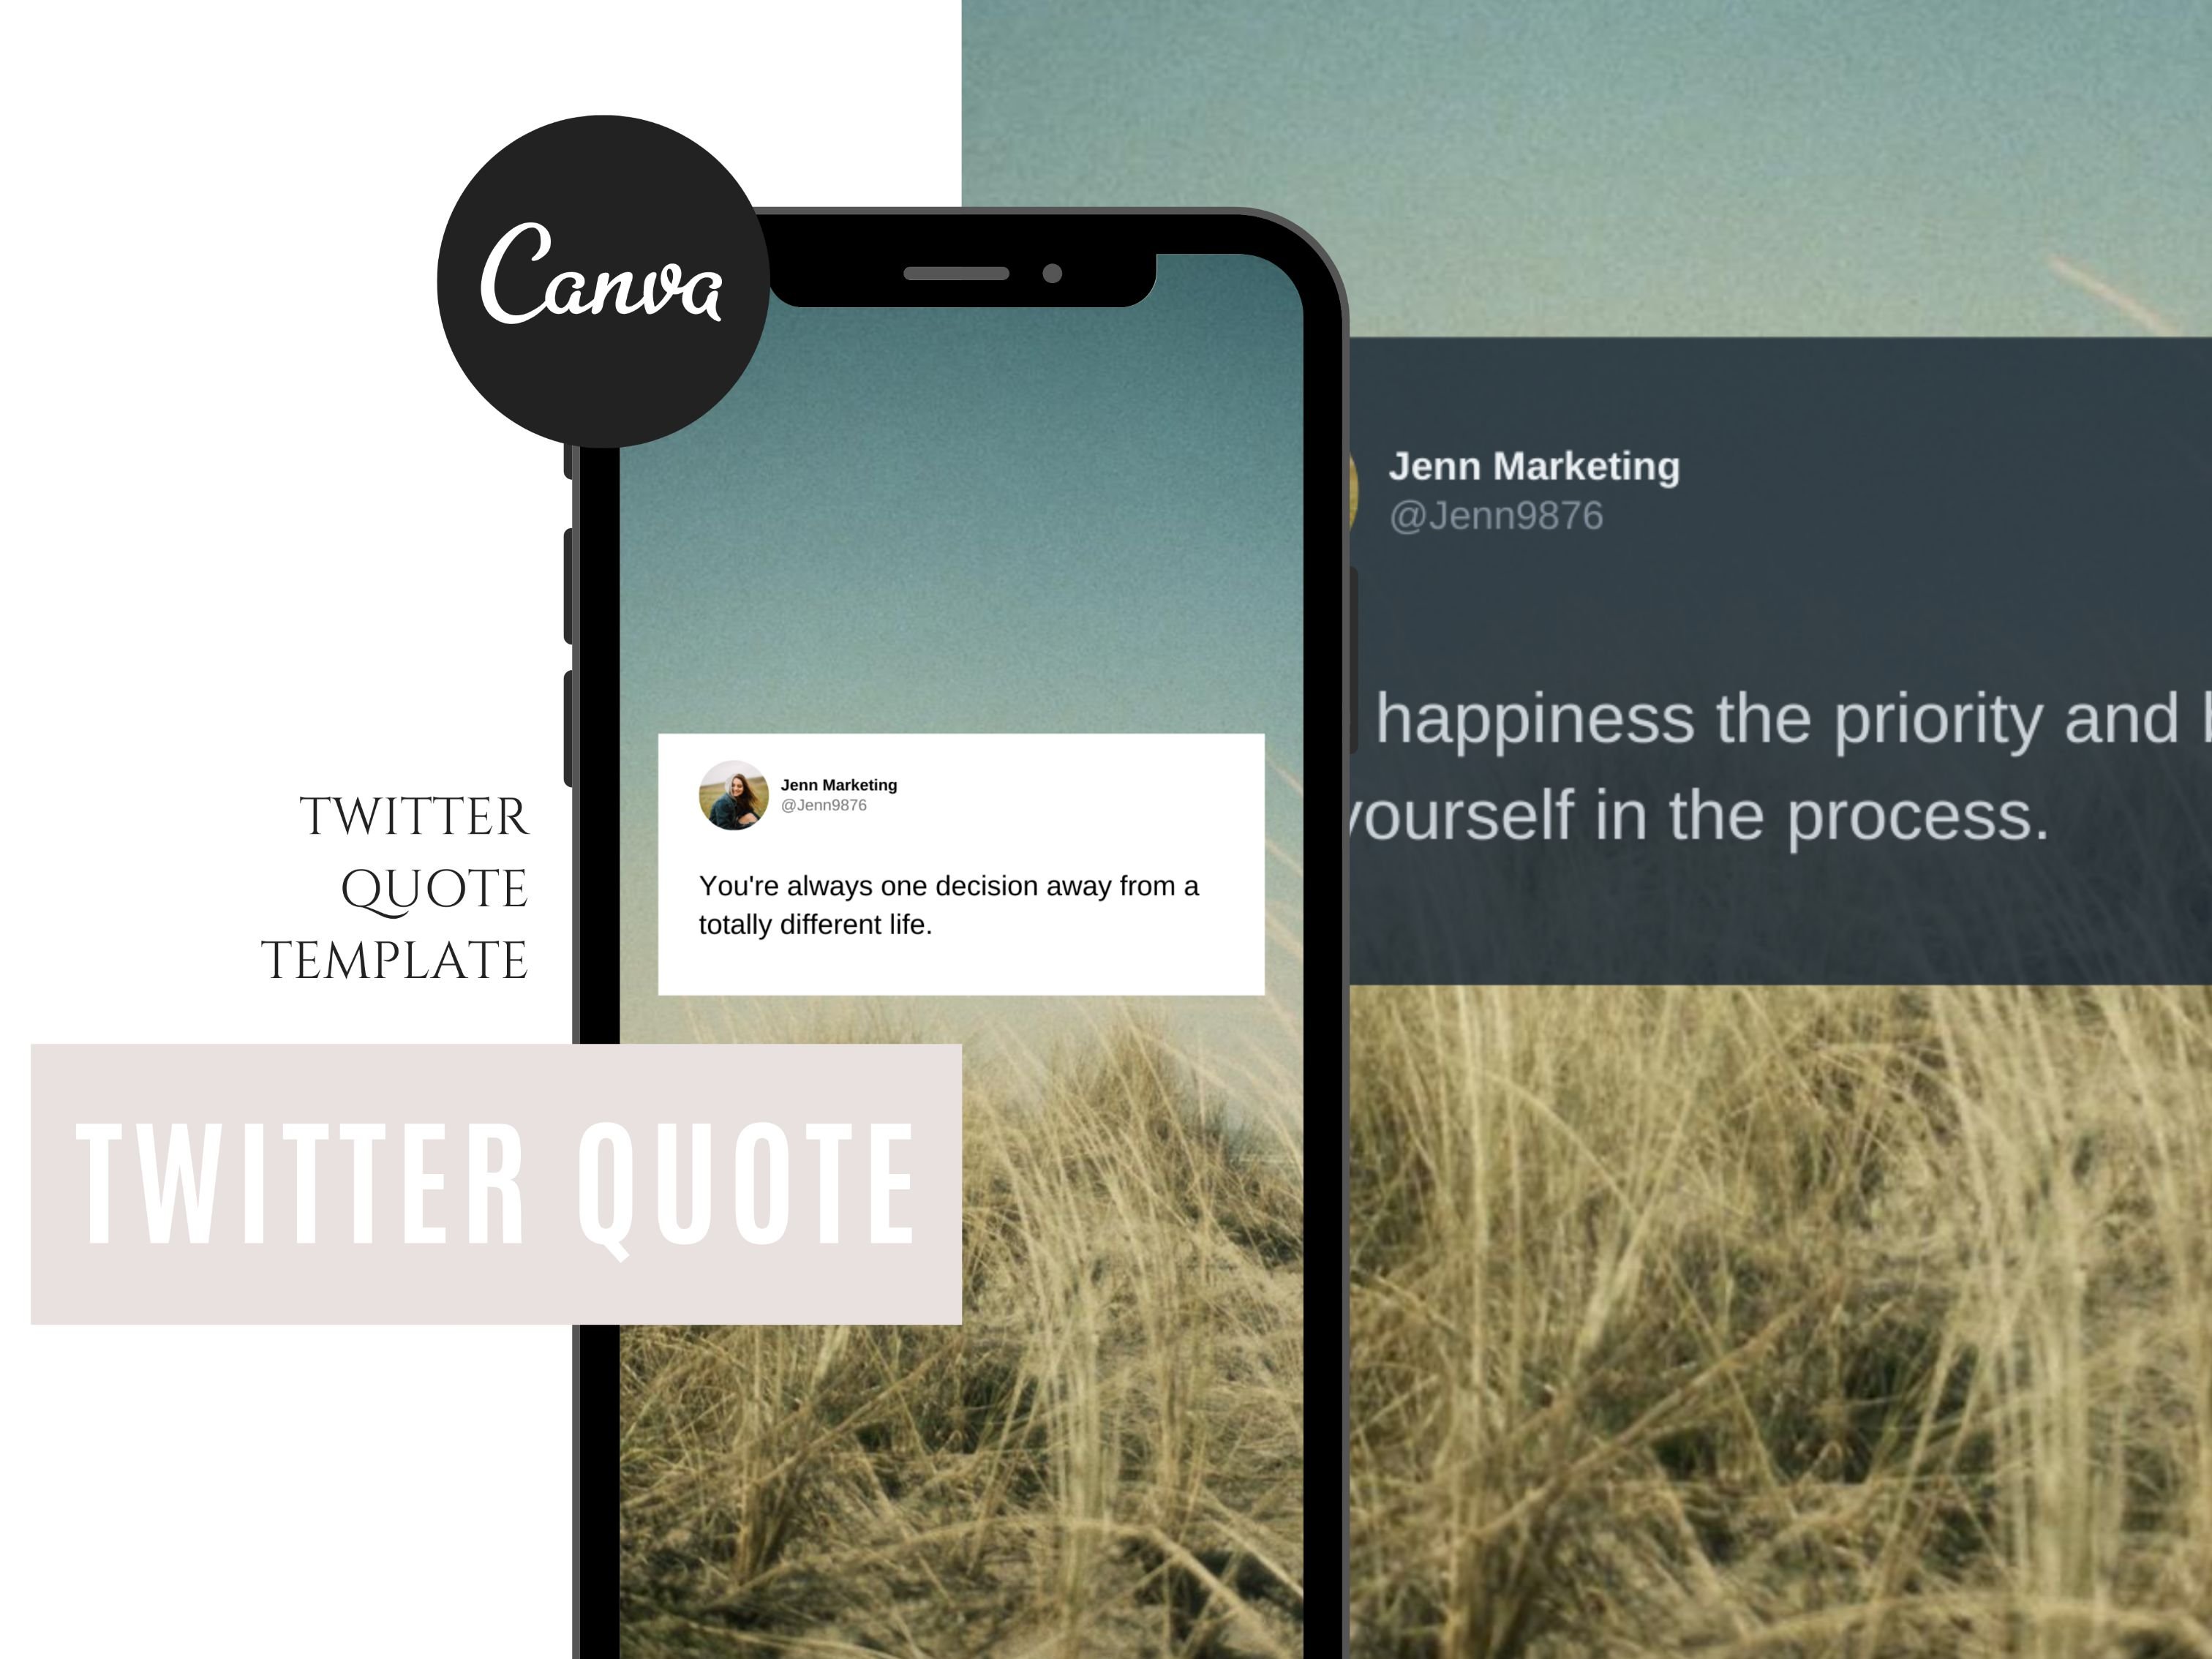 Twitter Quote Template For Canva cover image.